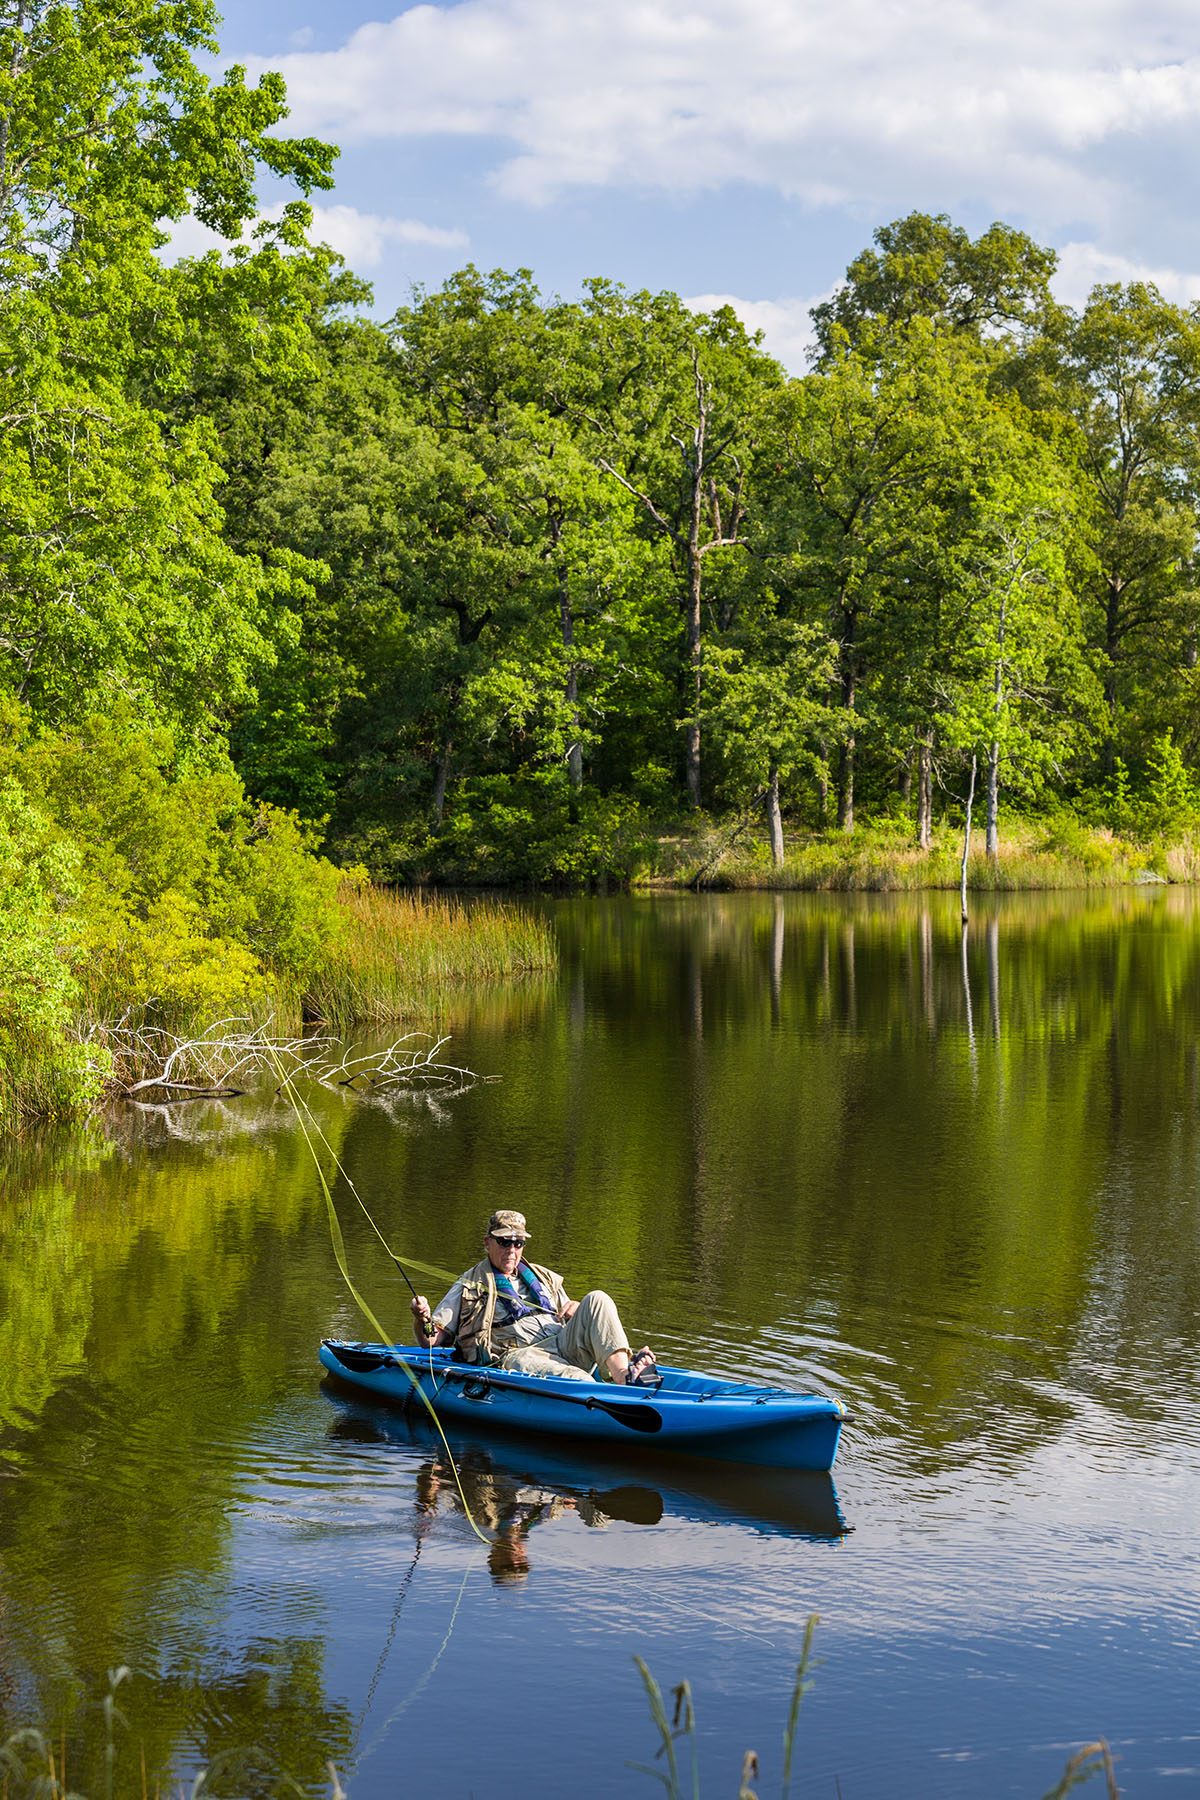 A person in a blue kayak casts a long fishing line on still water in front of blue trees